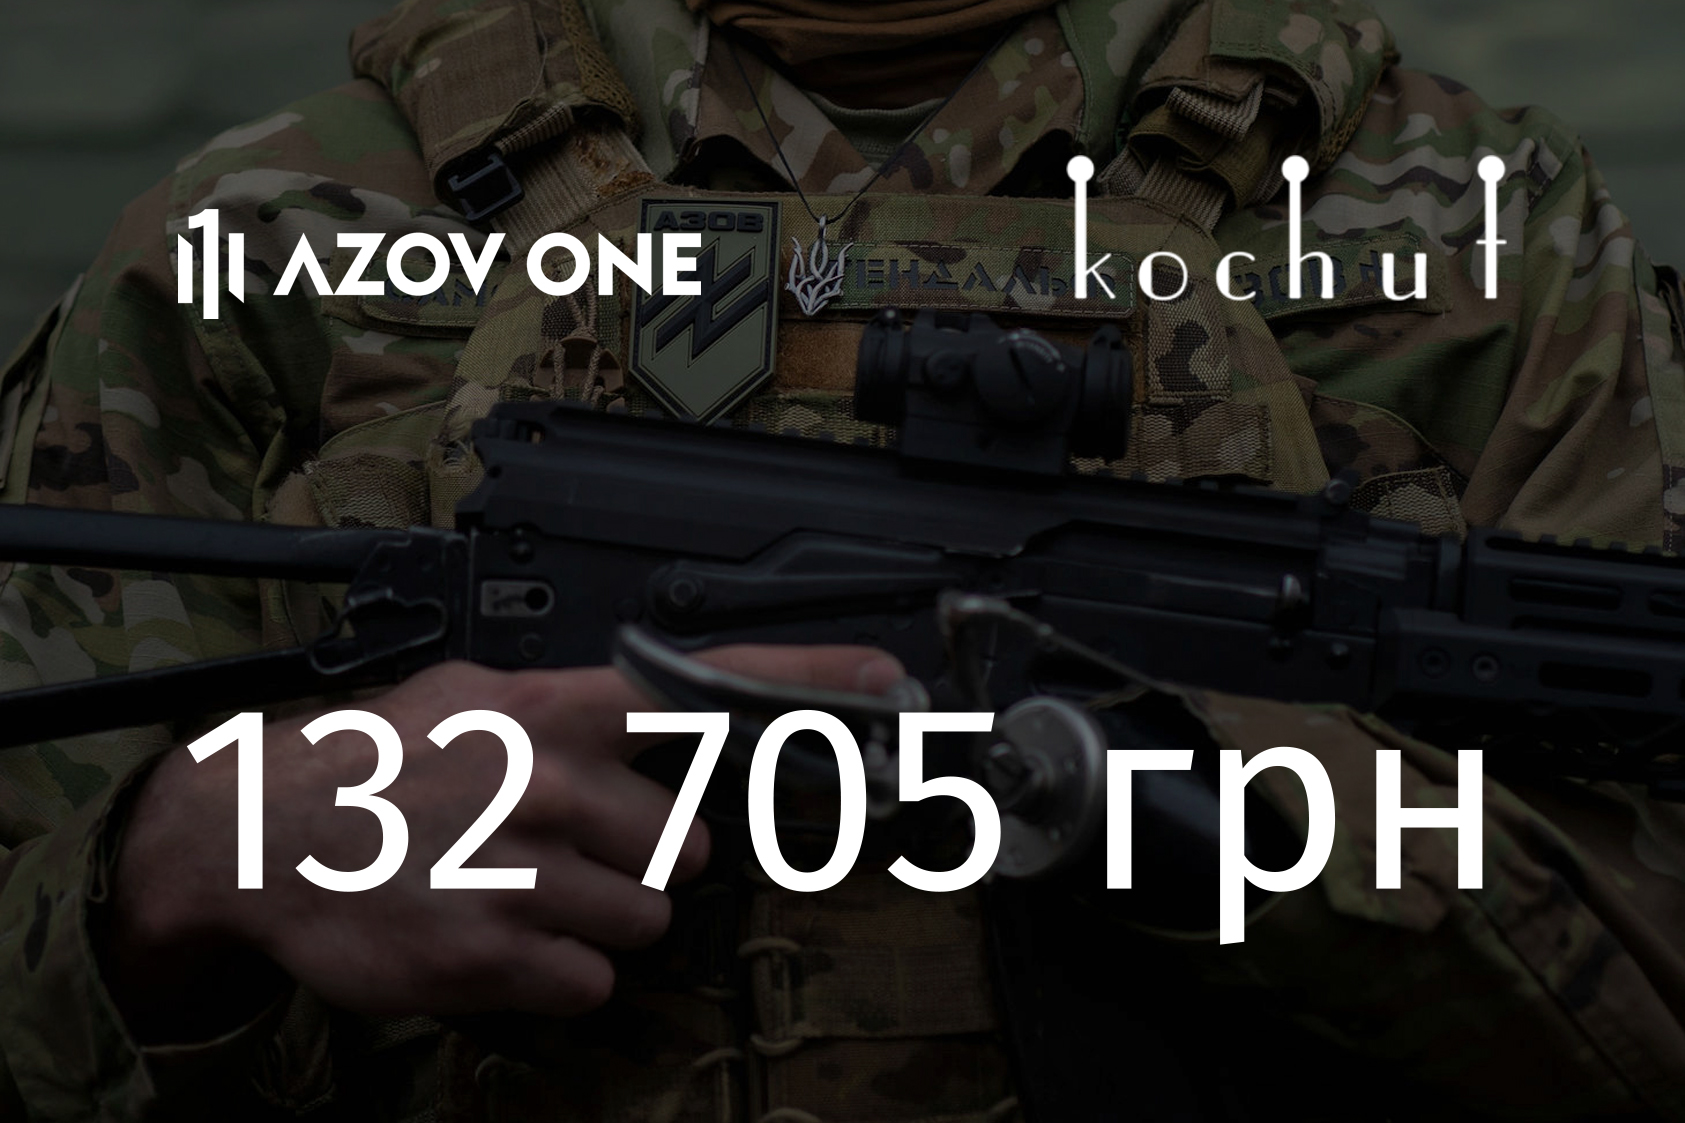 Report on the donation in AZOV ONE